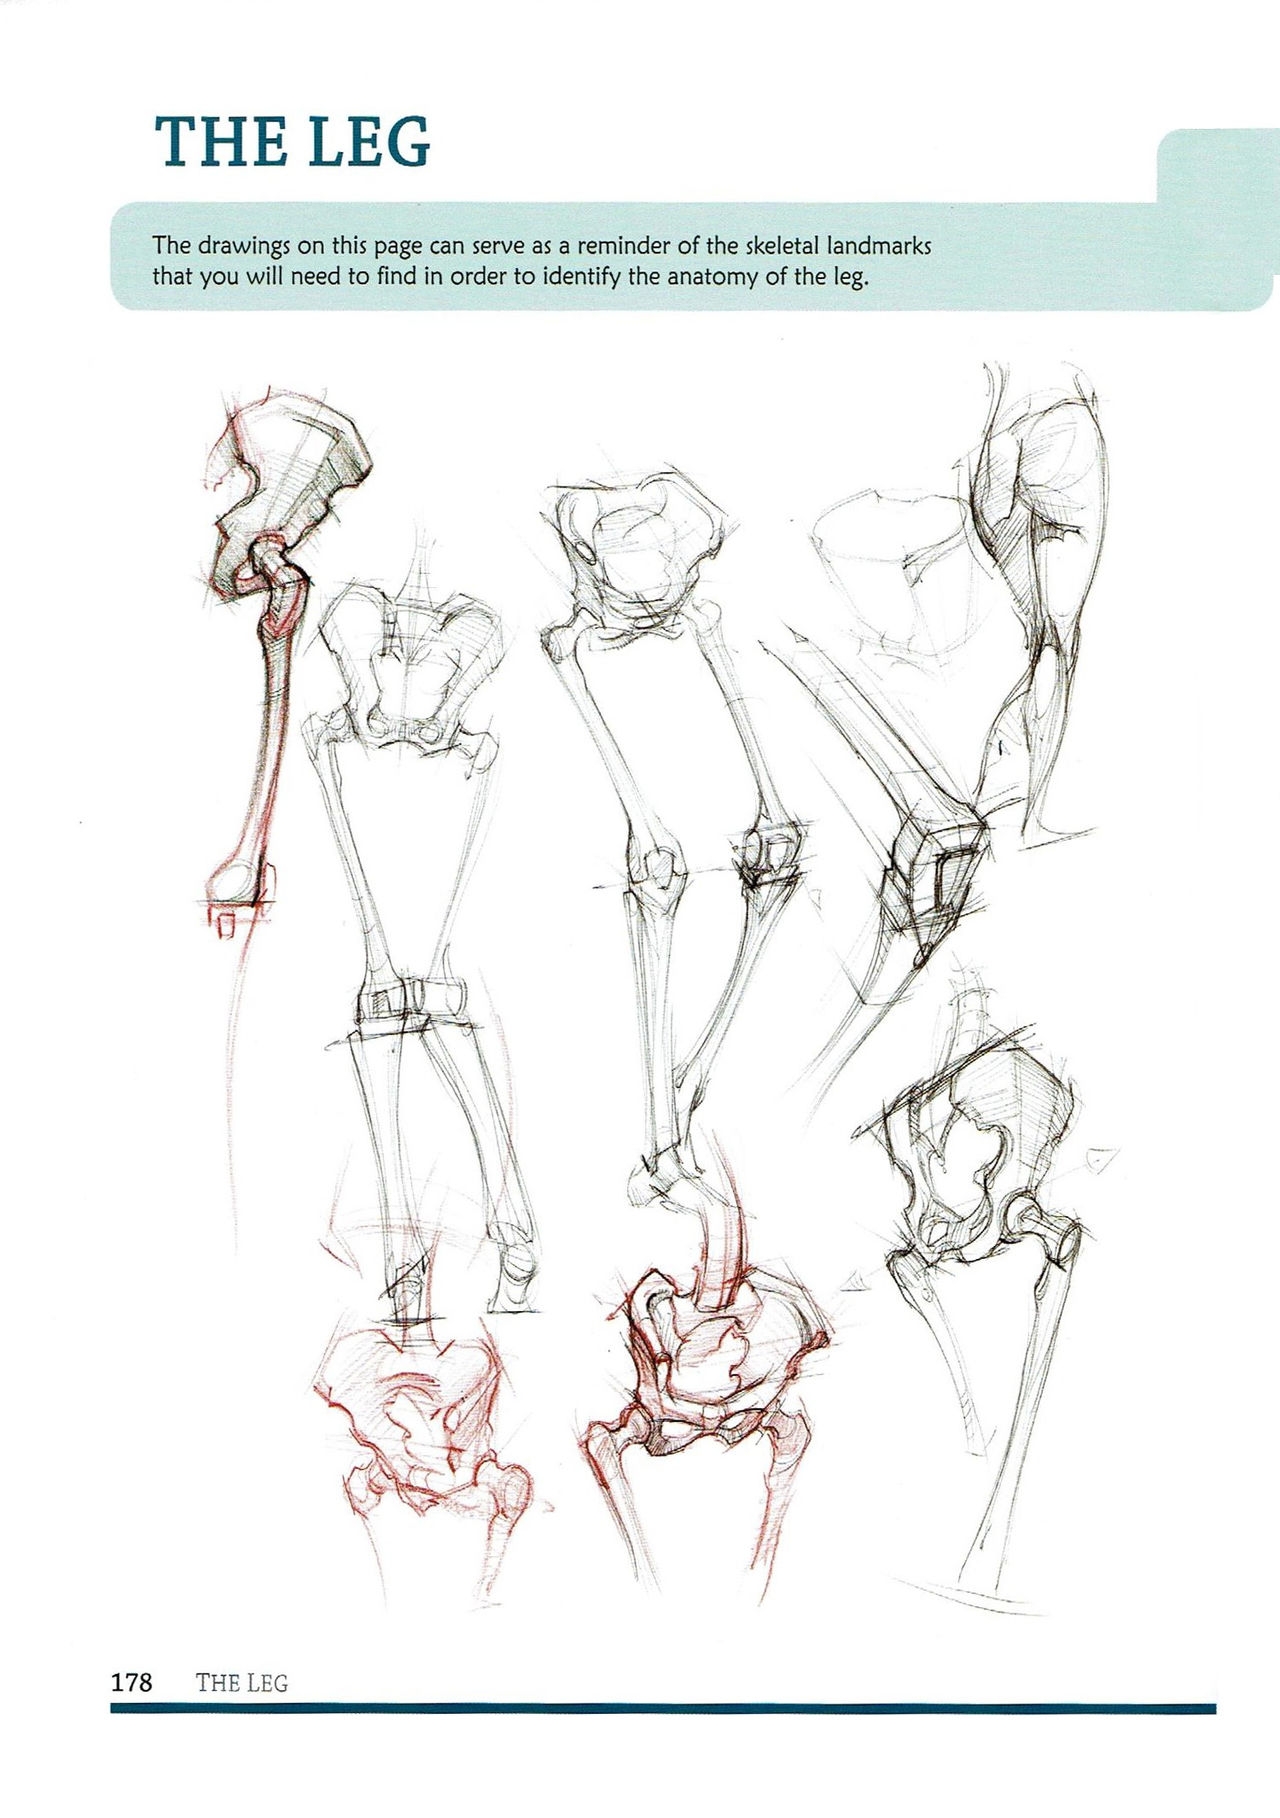 [Micheal Hampton] FIGURE DRAWING, Design and Invention (2013 Edition) 181